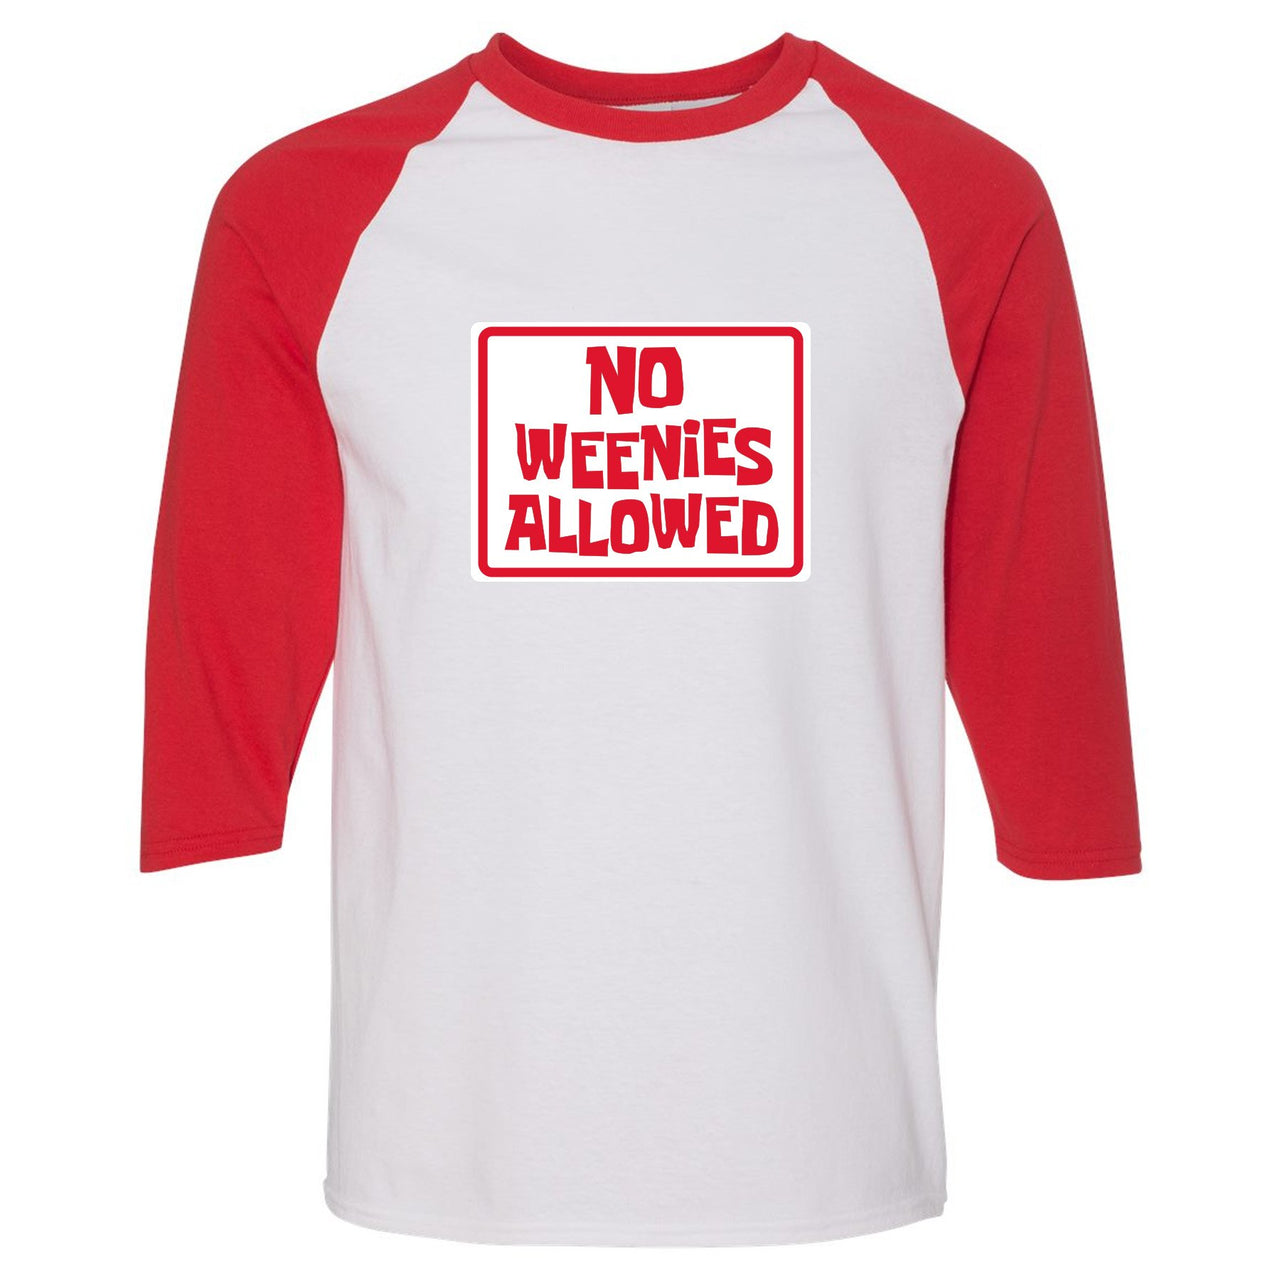 Patrick K5s Raglan T Shirt | No Weenies Allowed, White and Red